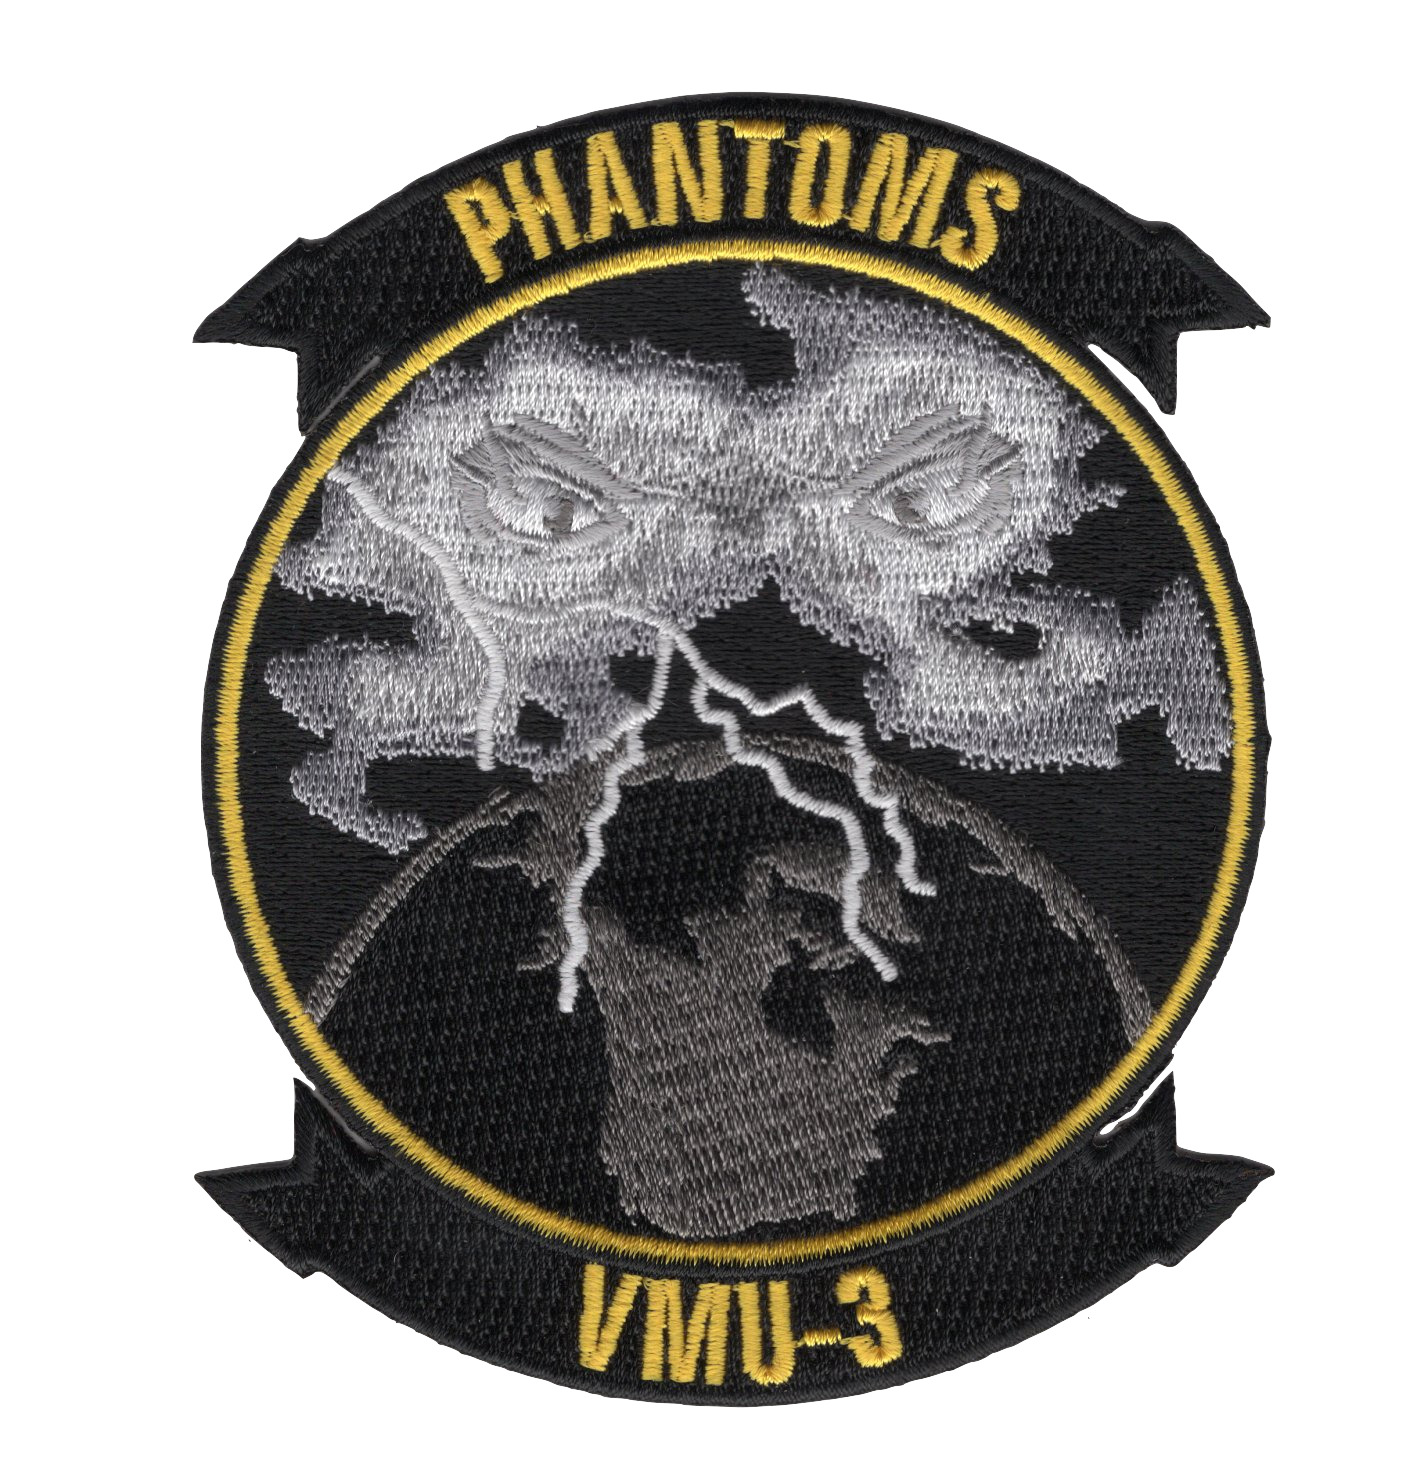 VMU-3 Unmanned Aerial Vehicle Squadron Patch